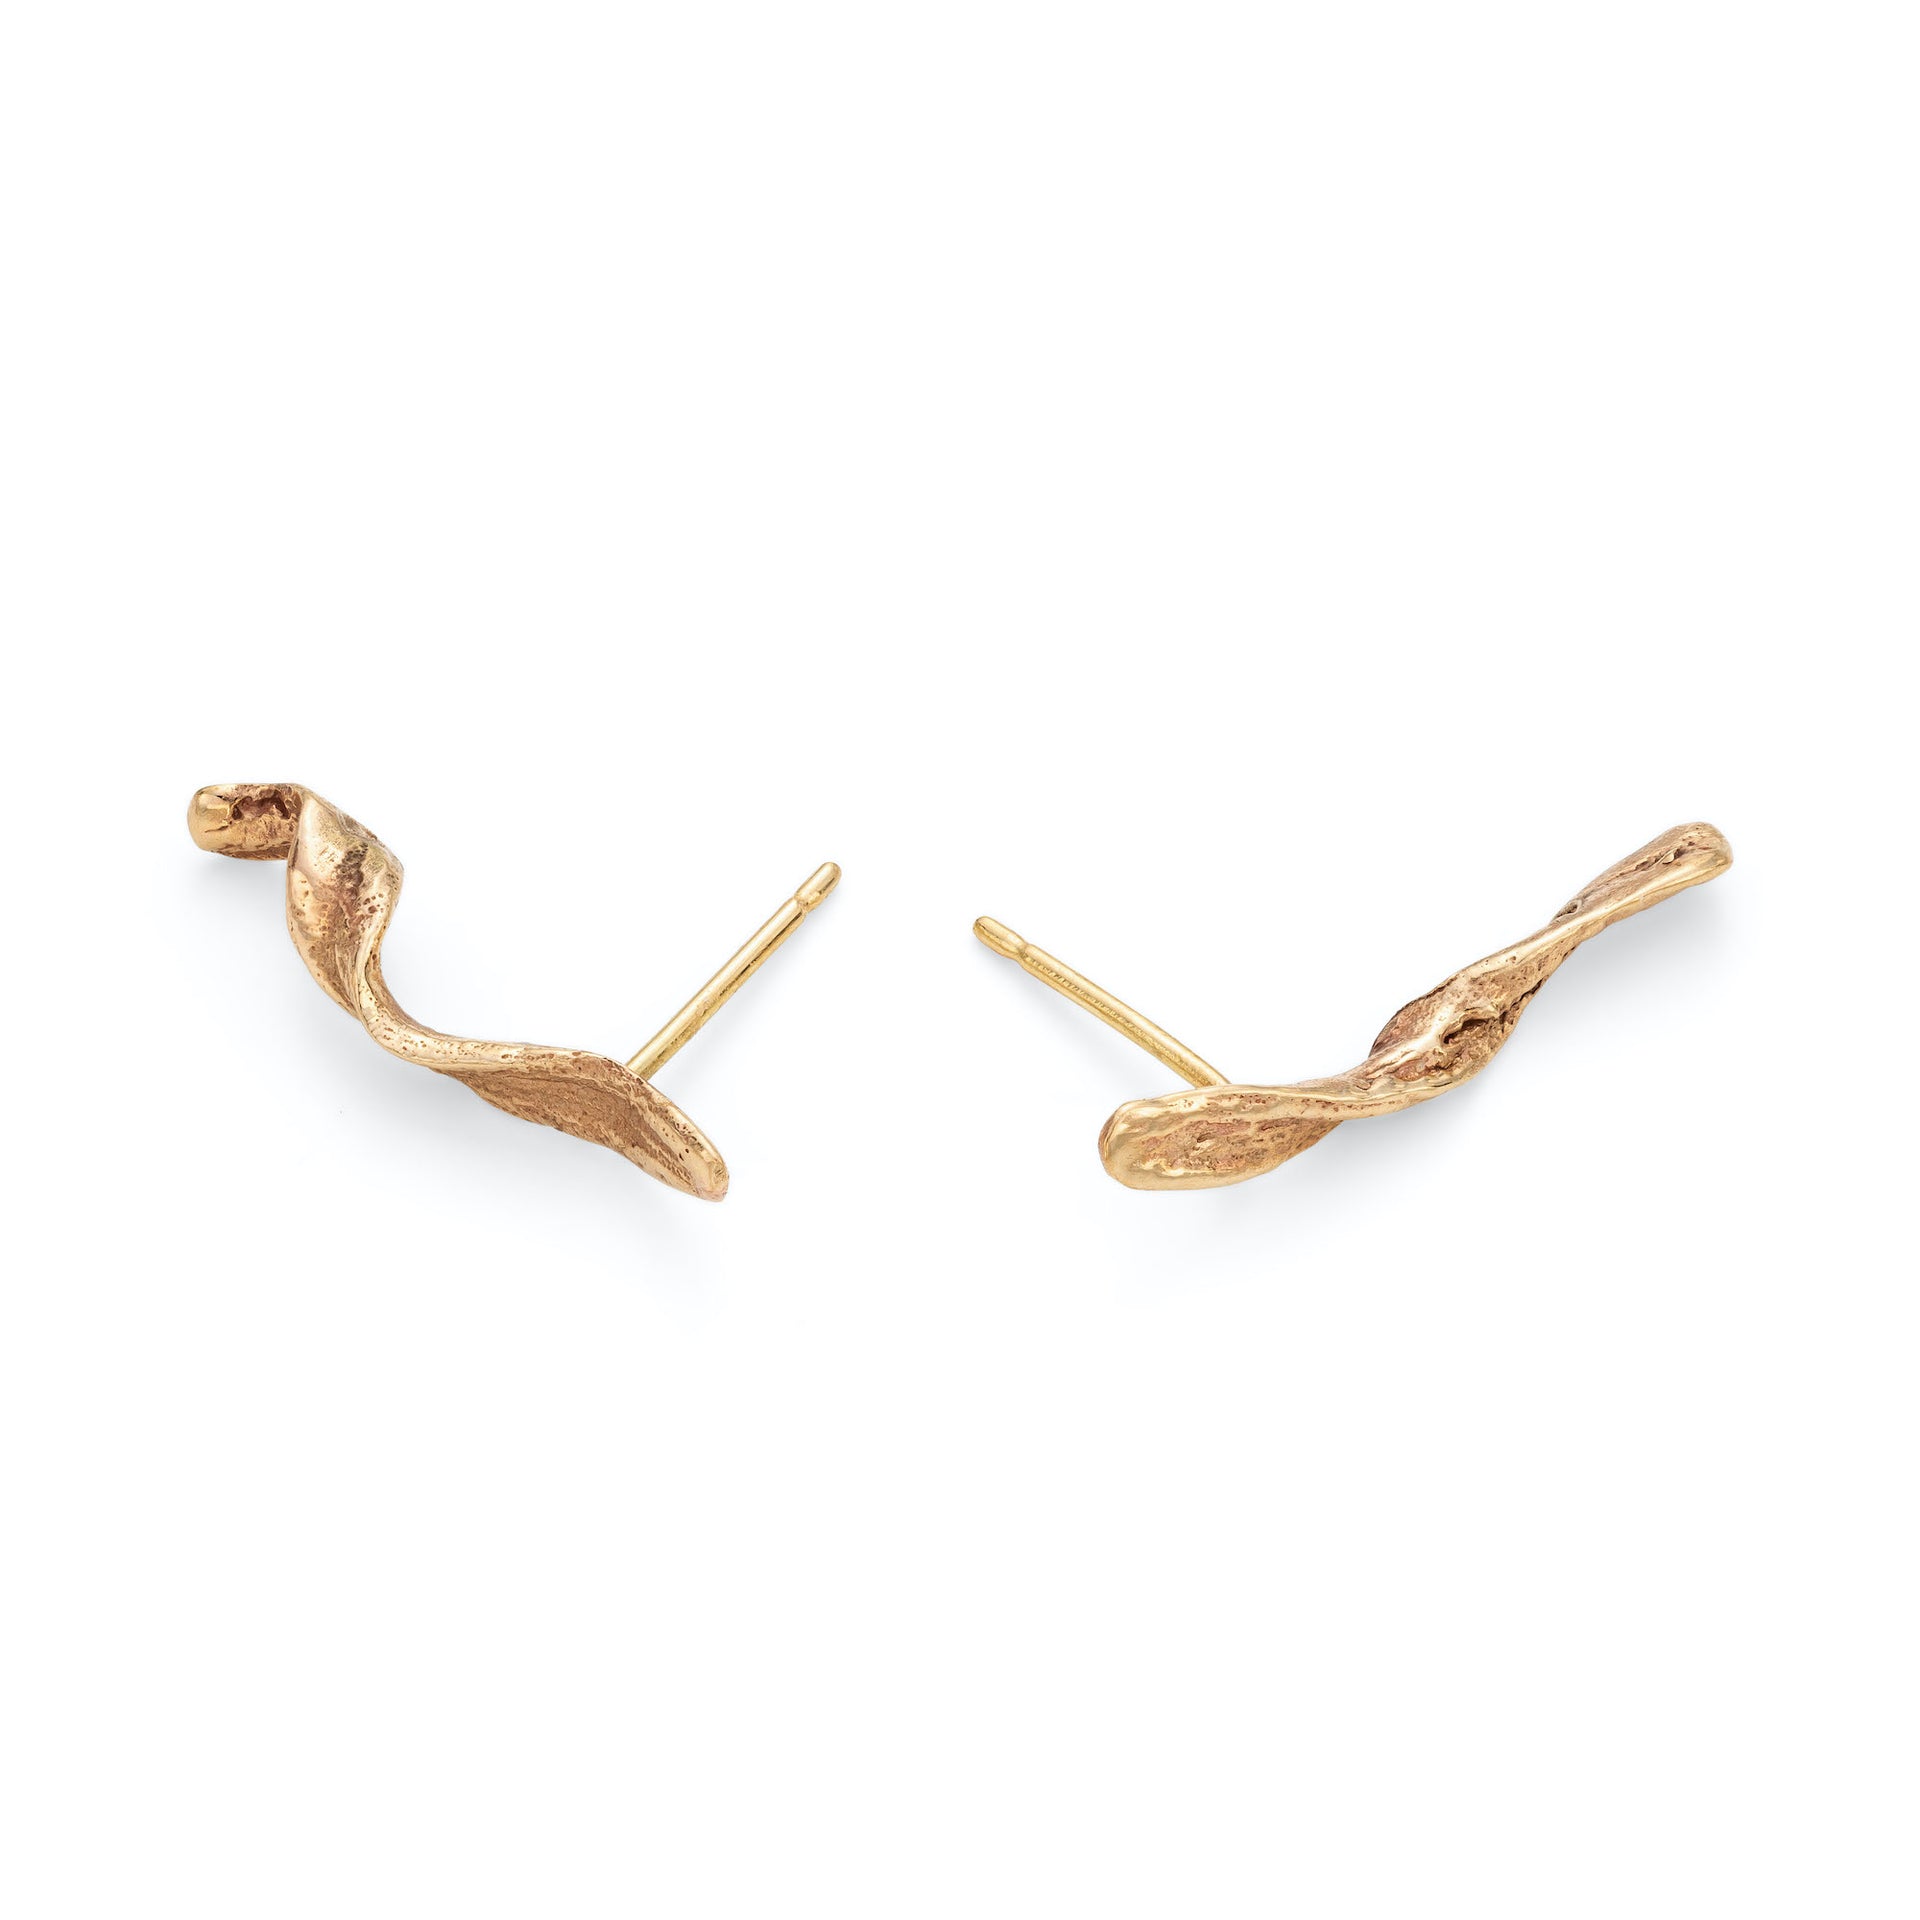 Contemporary 9ct Gold climber earrings, made by hand in Cornwall by Emily Nixon. 